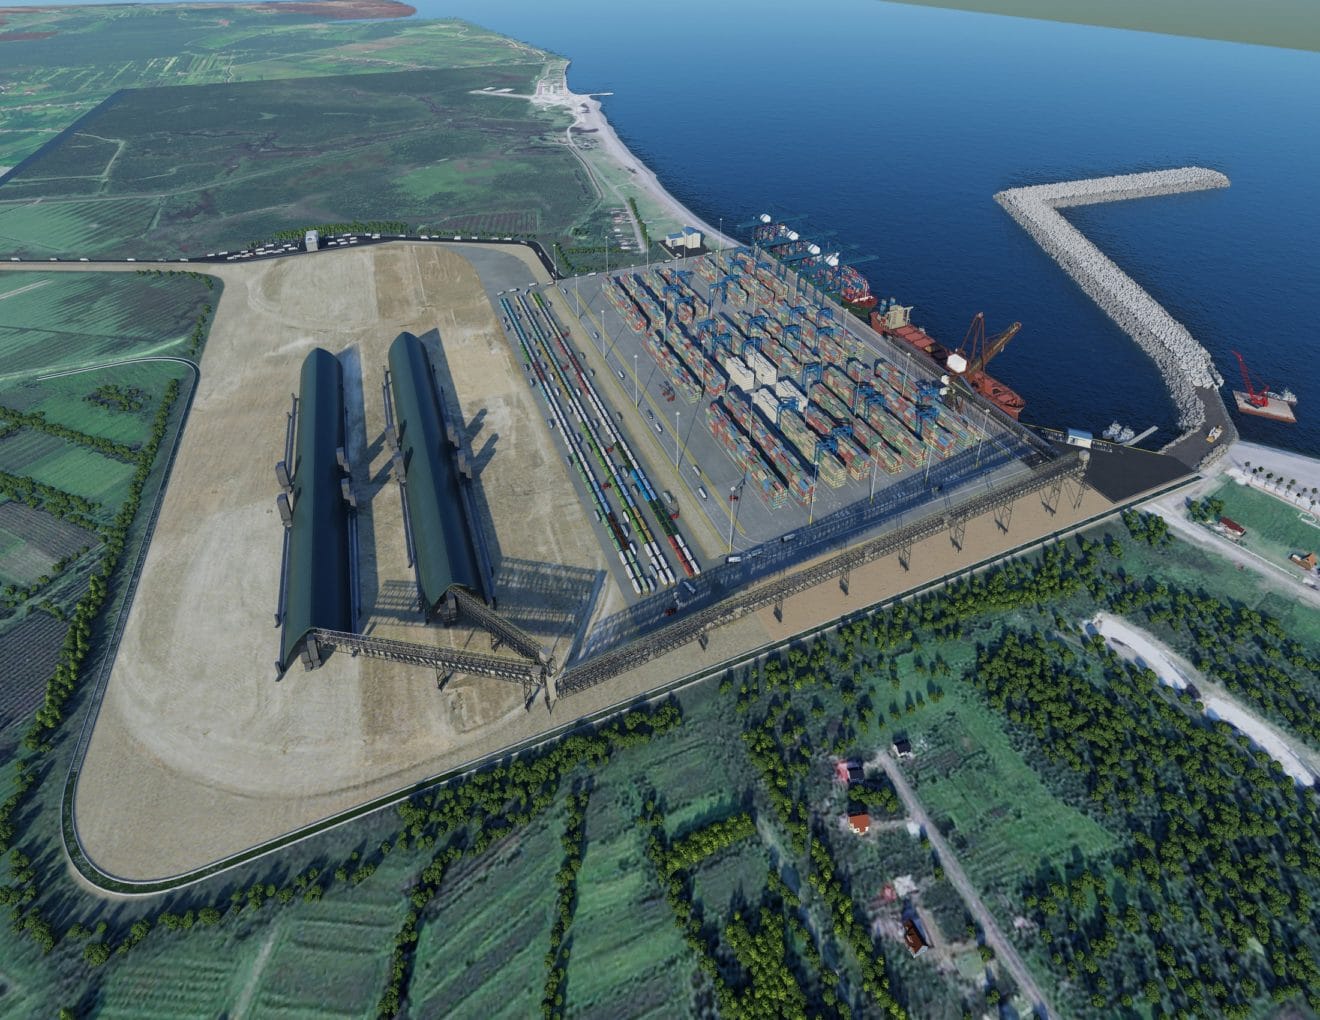 Georgian Government Plans To Seek Investor For The Anaklia Deep Sea Port Project